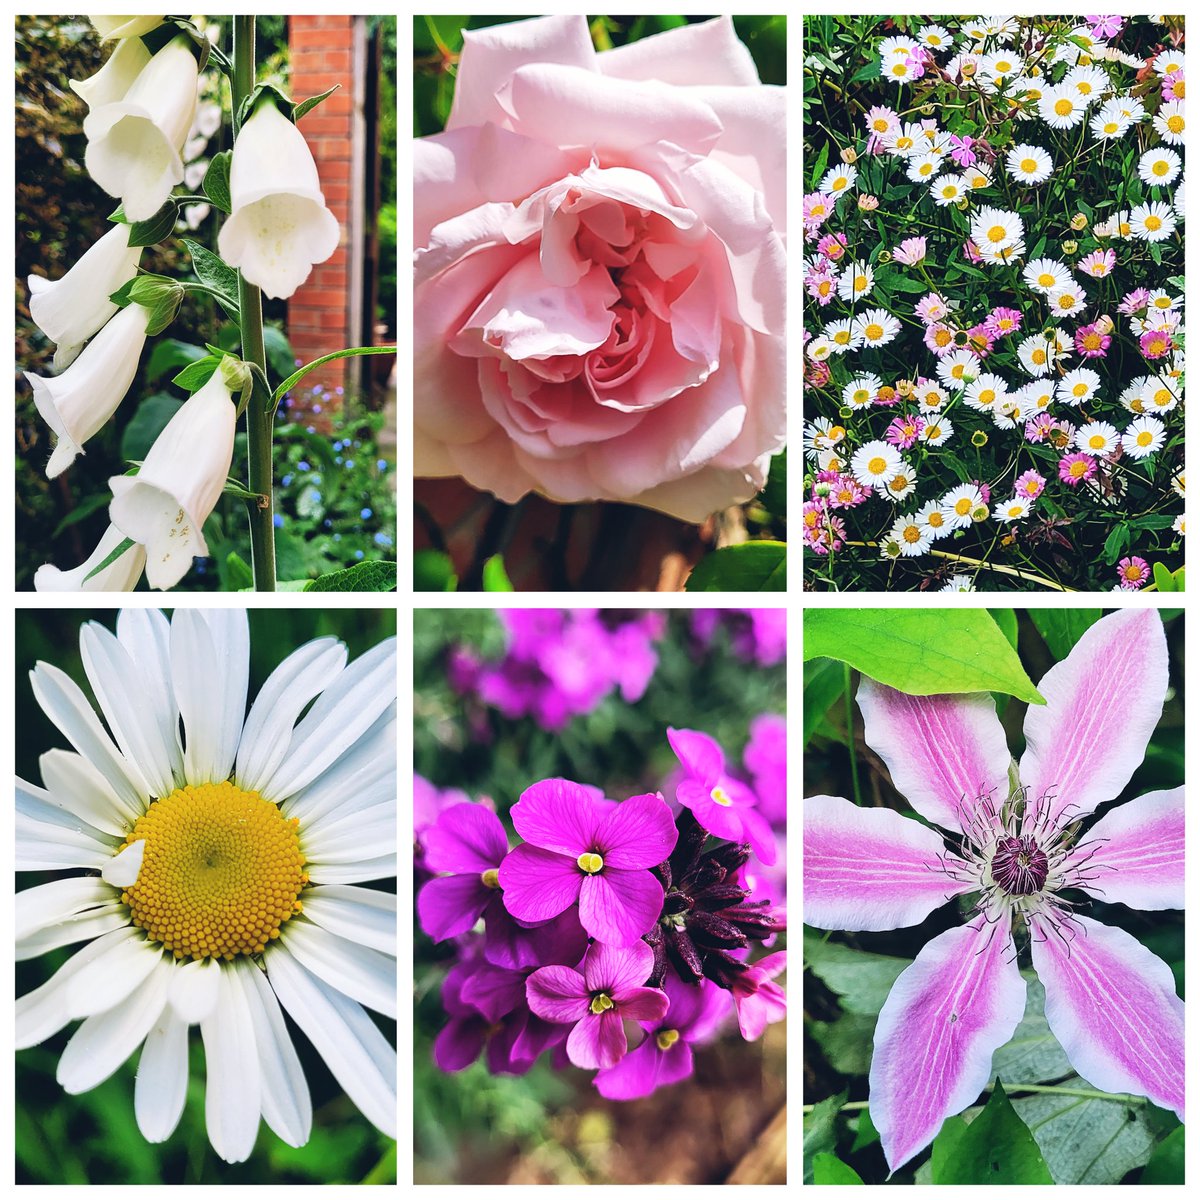 My #SixOnSaturday this week
 An eclectic mix of flowers 😊